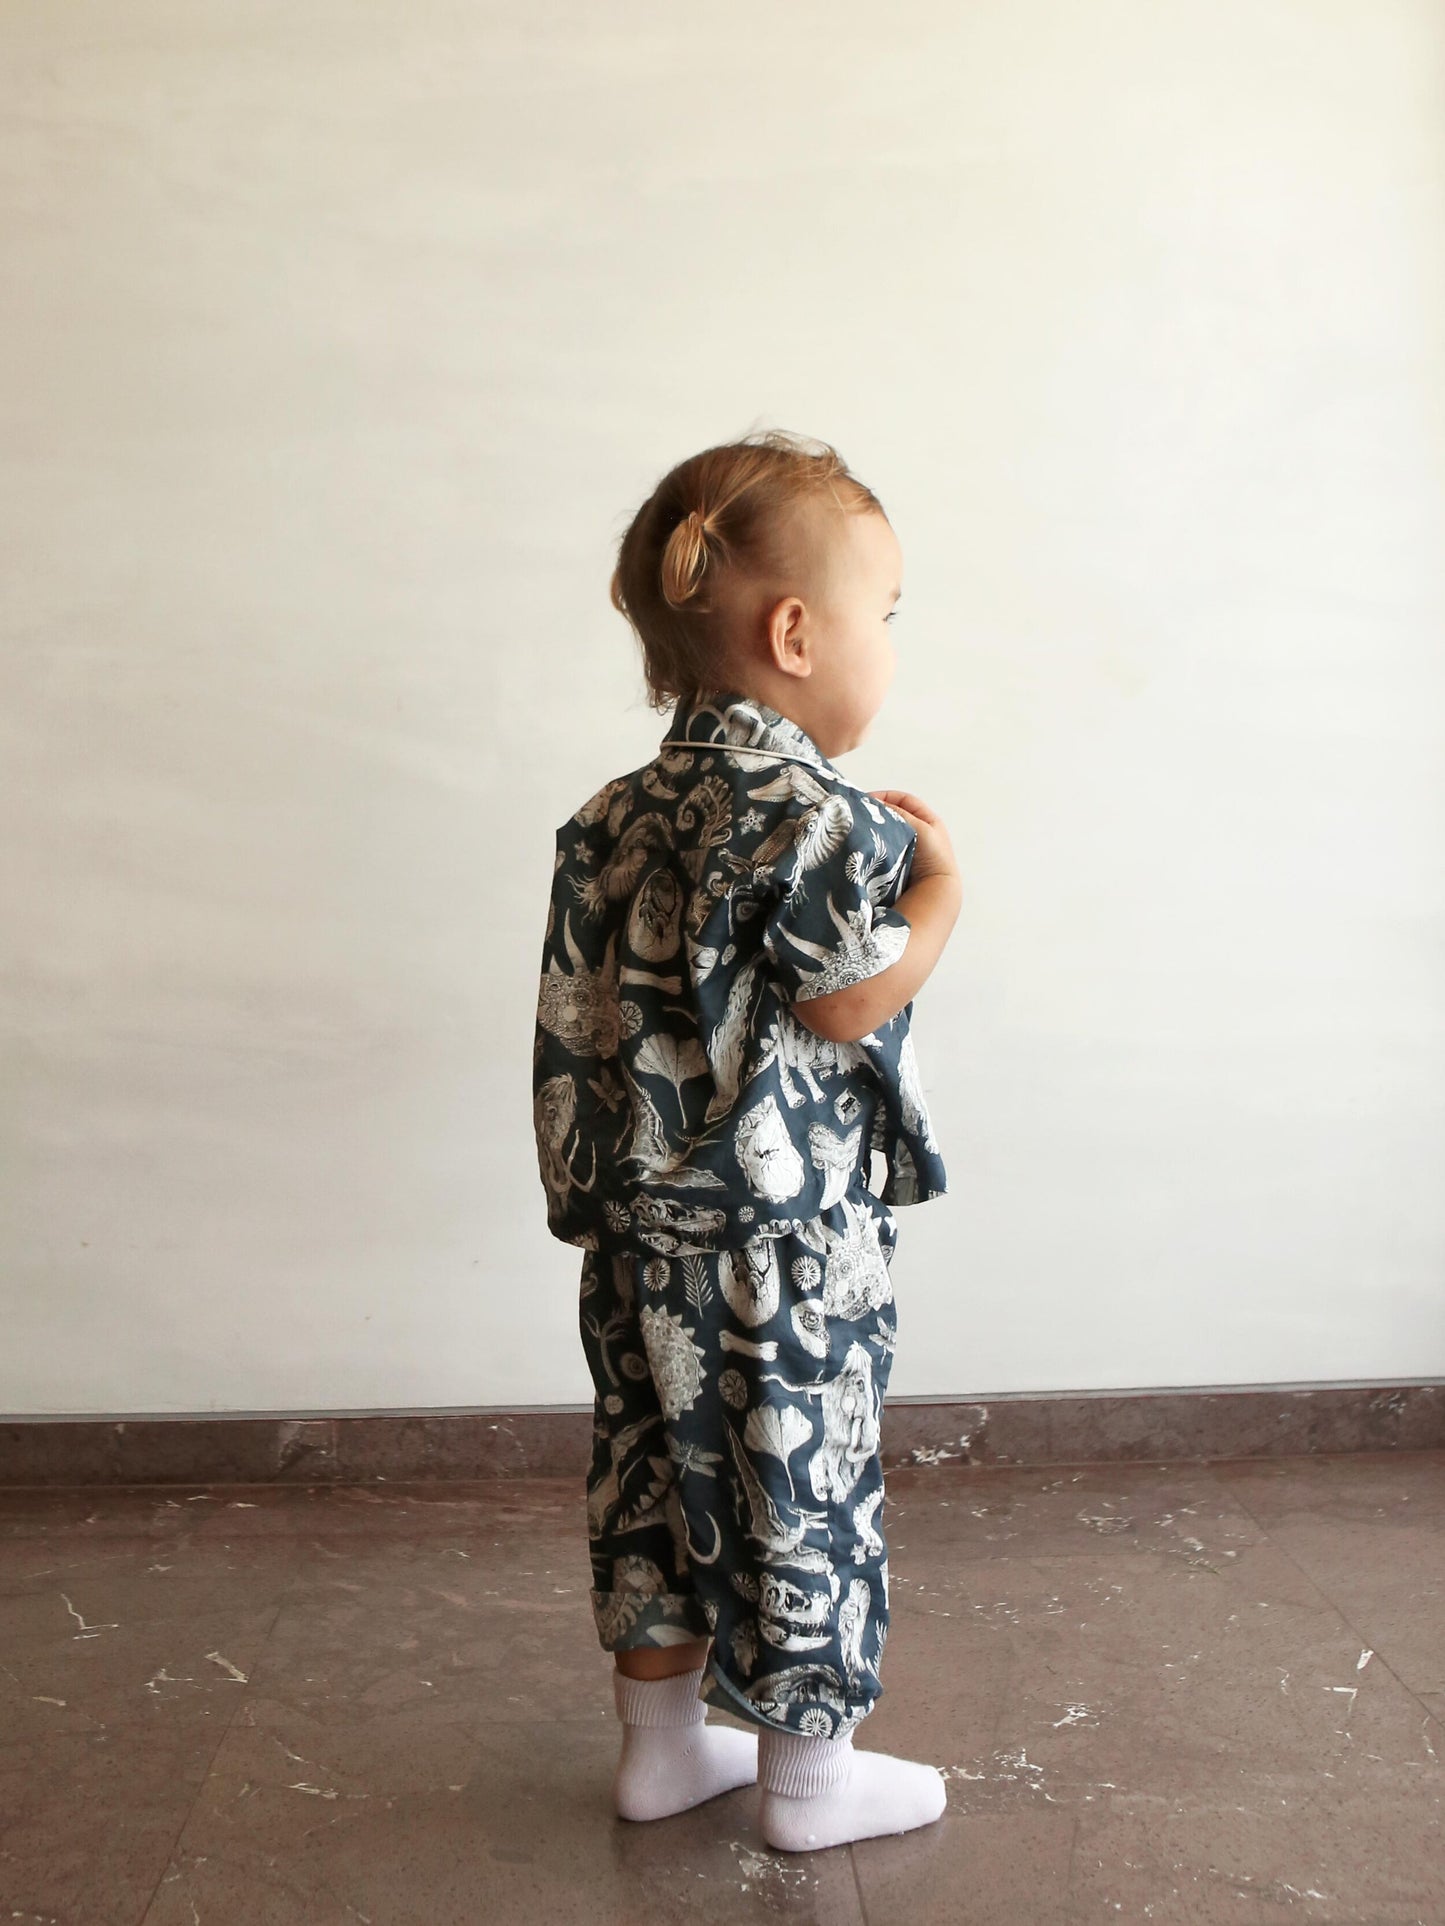 Ideal for cozy nights as well as adventurous days for all of your little dinosaur enthusiasts out there - no matter boys and girls. The high-quality Pyjama-Set comes with the famous prehistoric illustration by Tattoo-Artist Suflanda.